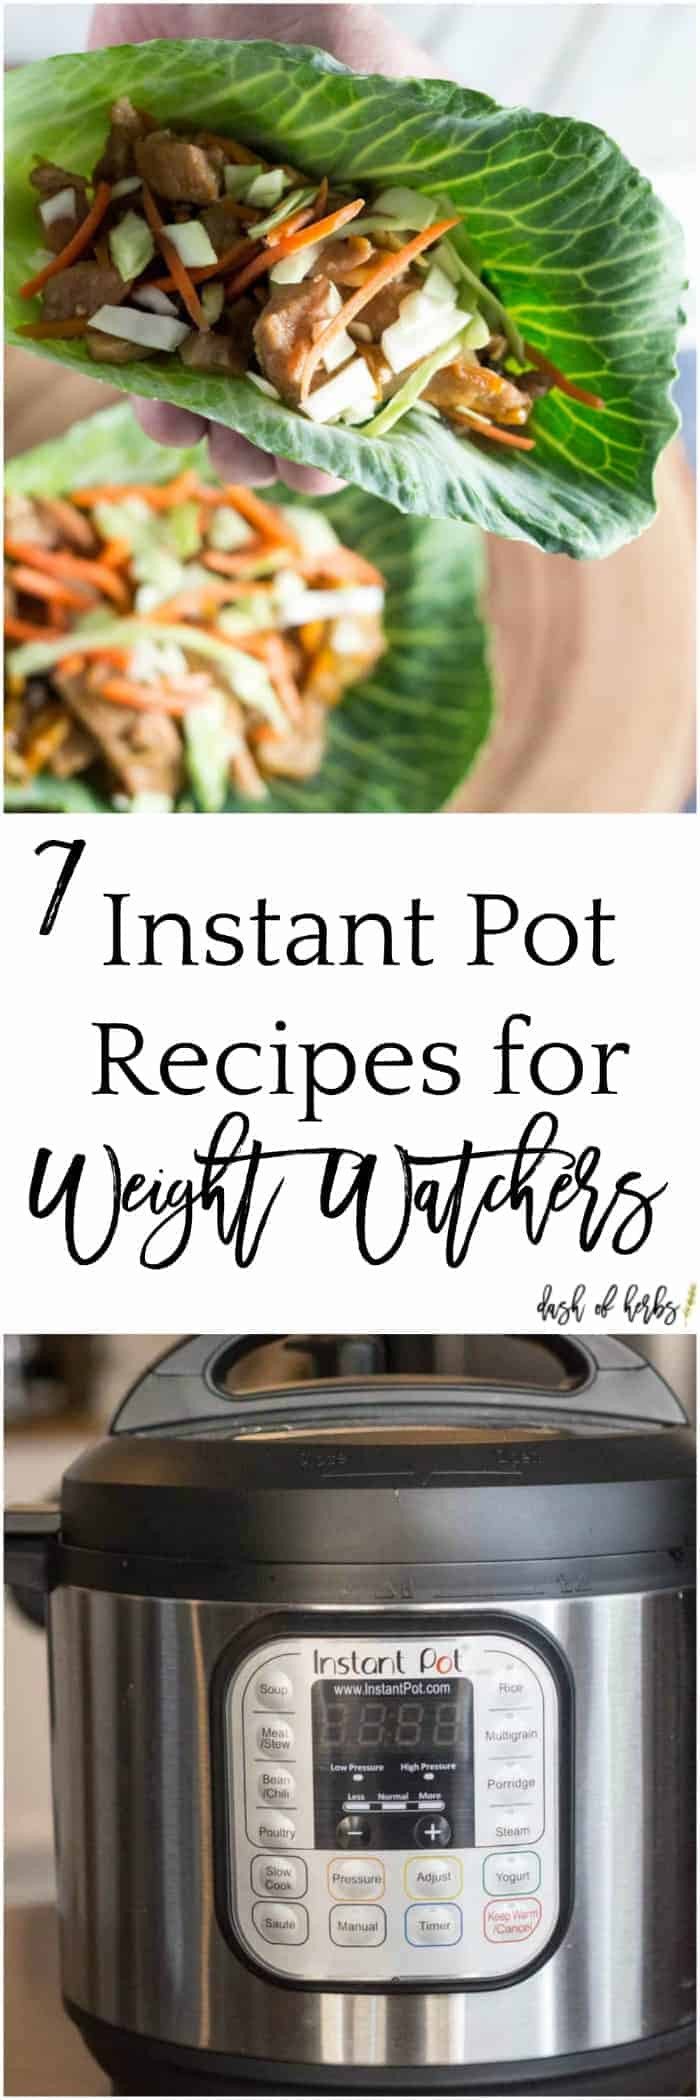 Instant Pot Weight Watcher Recipes
 7 Instant Pot Recipes for Weight Watchers Dash of Herbs